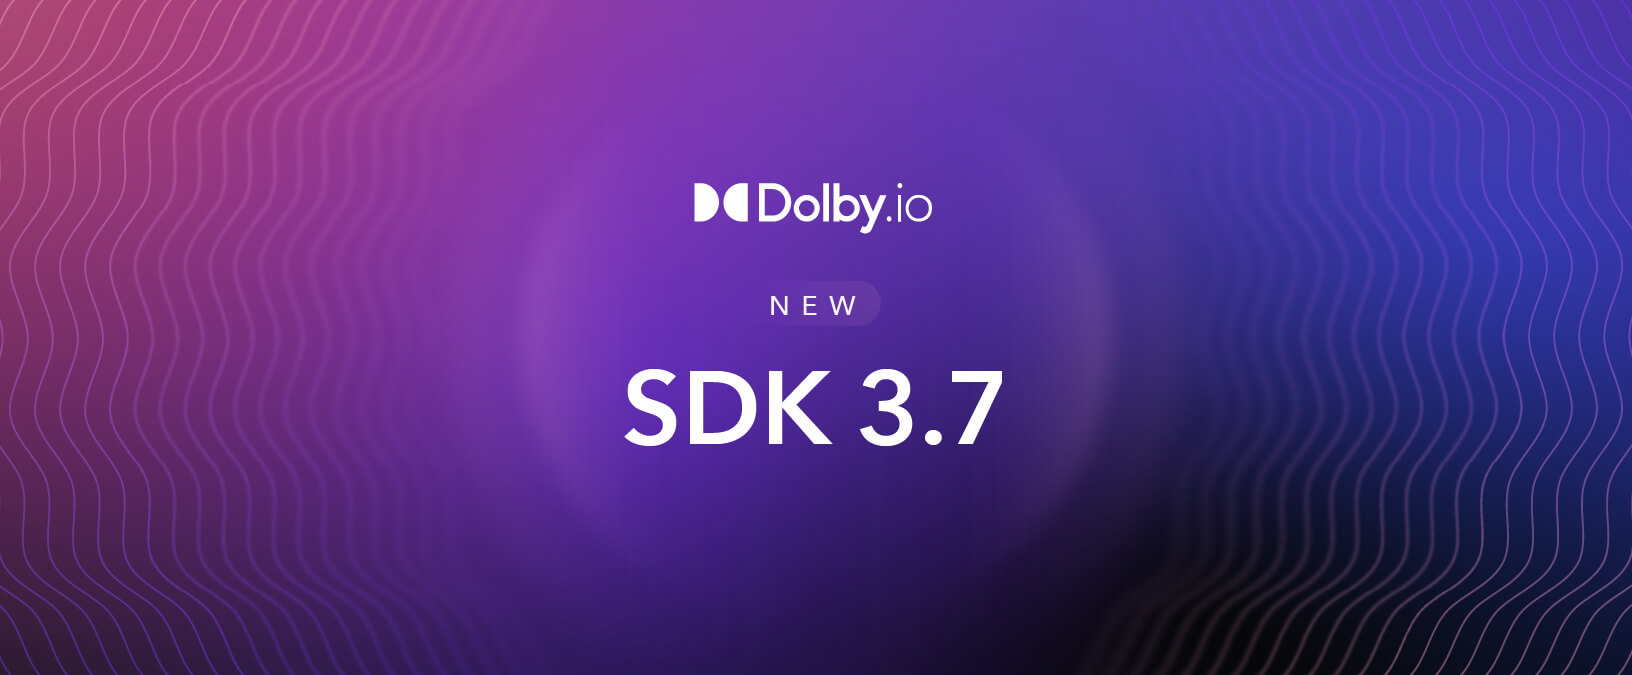 Dolby.io launches SDK 3.7 with virtual backgrounds